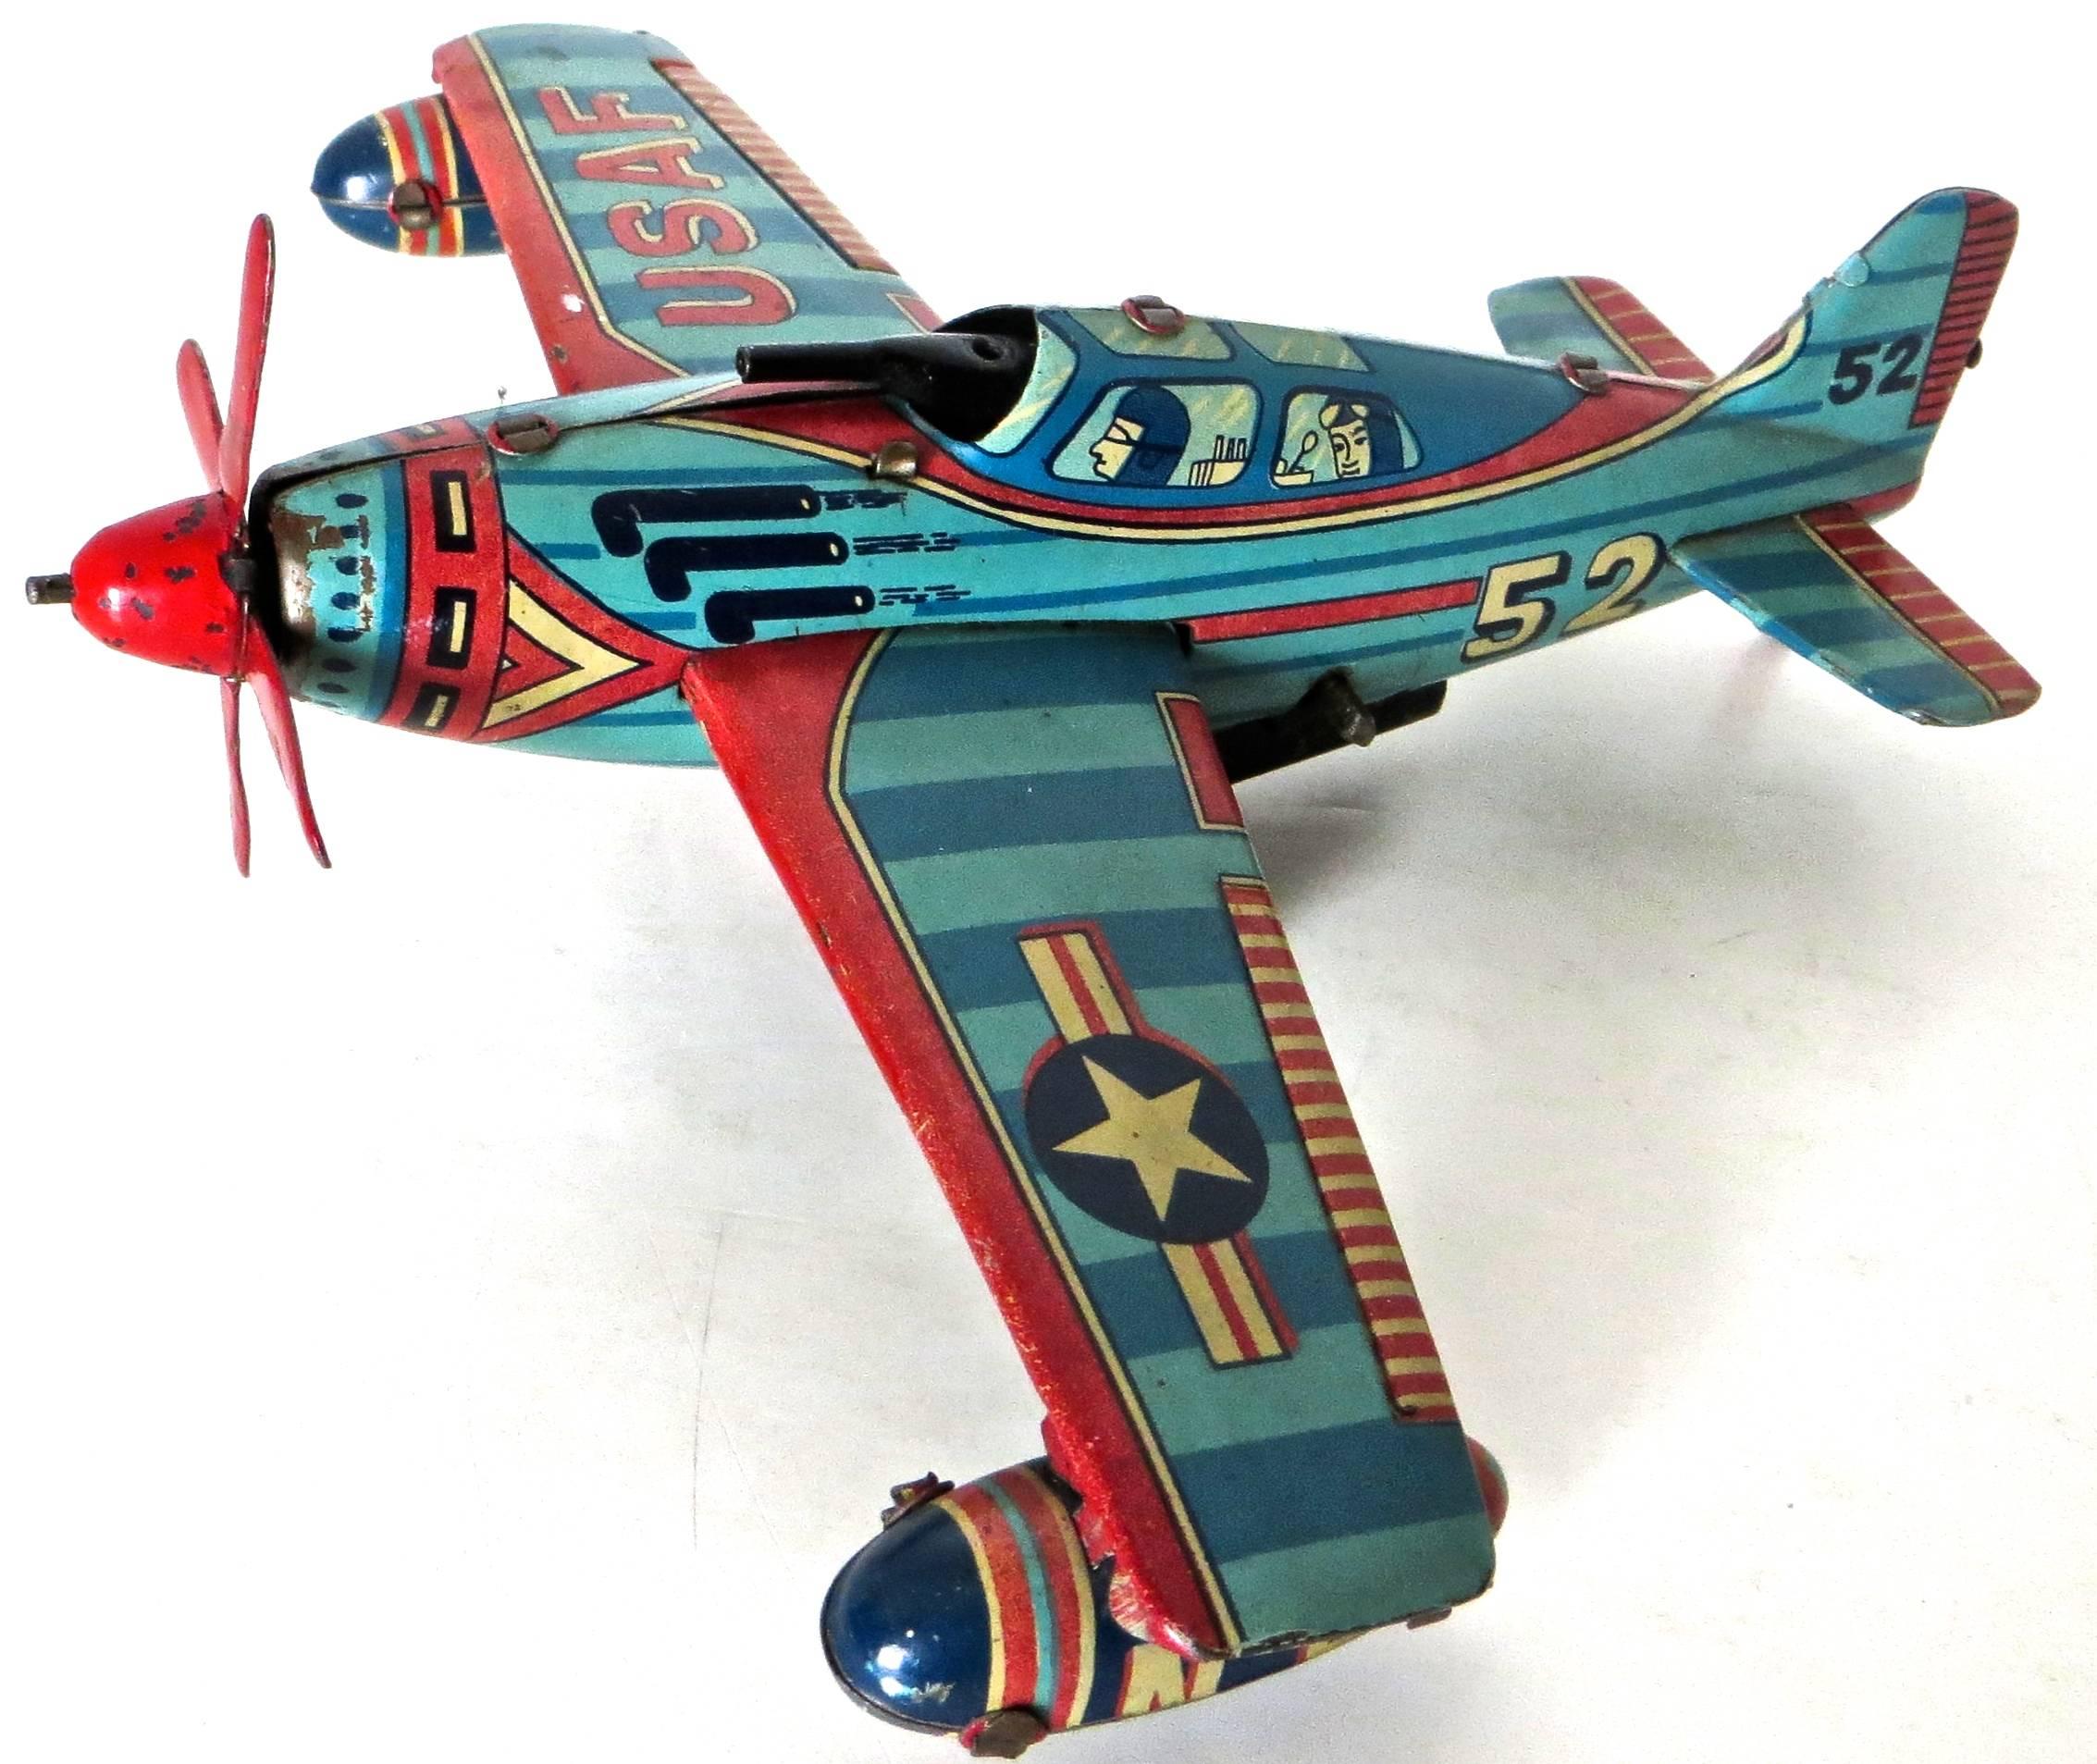 Excellent and all original condition tinplate lithographed and hand painted all tin toy airplane 